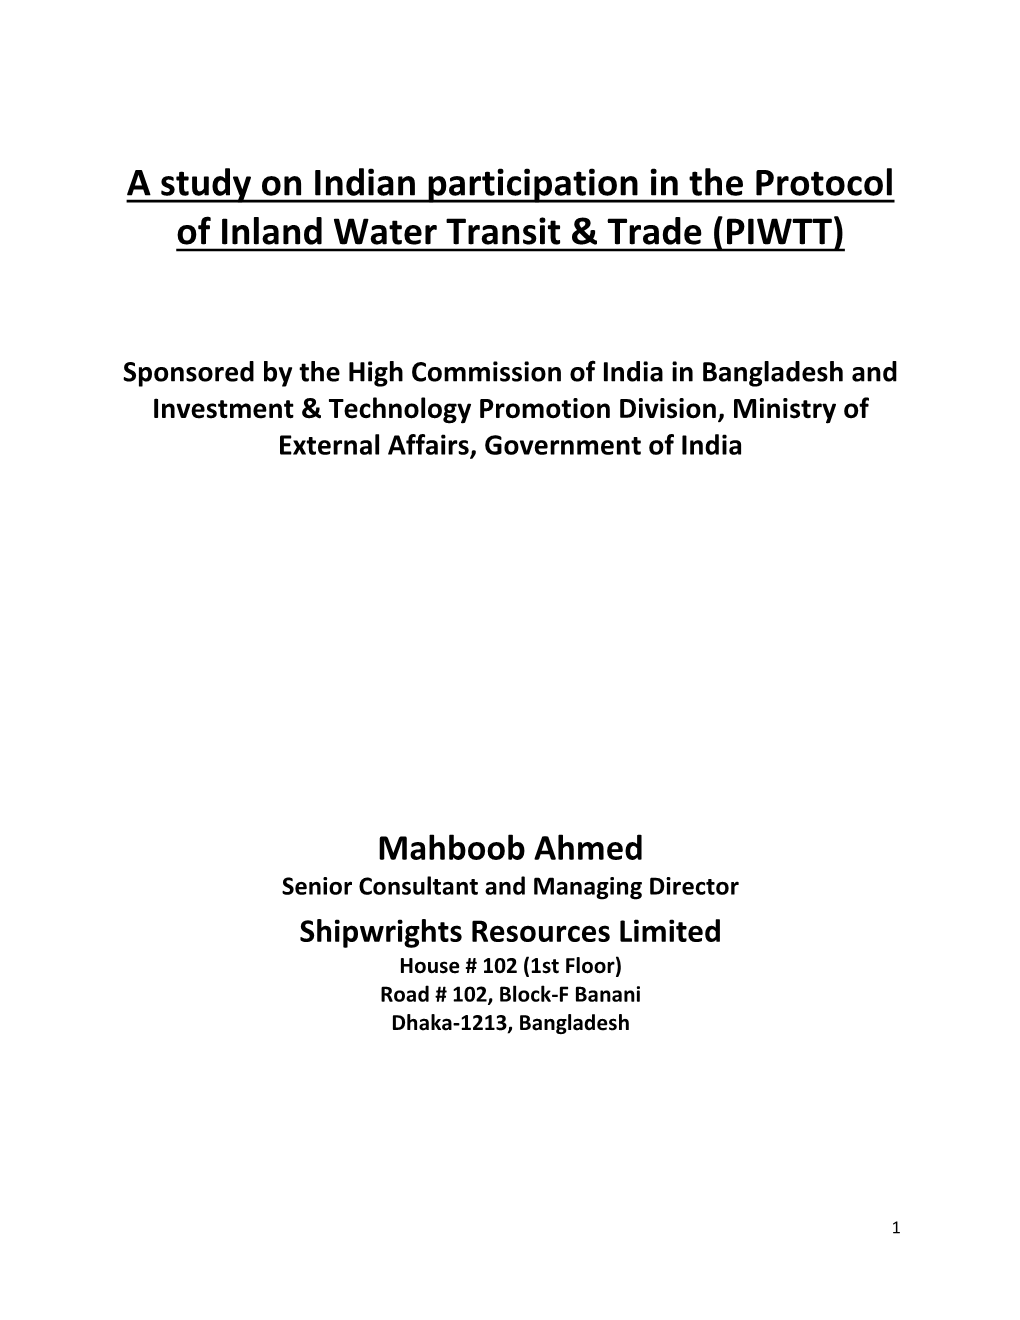 A Study on Indian Participation in the Protocol of Inland Water Transit & Trade (PIWTT)